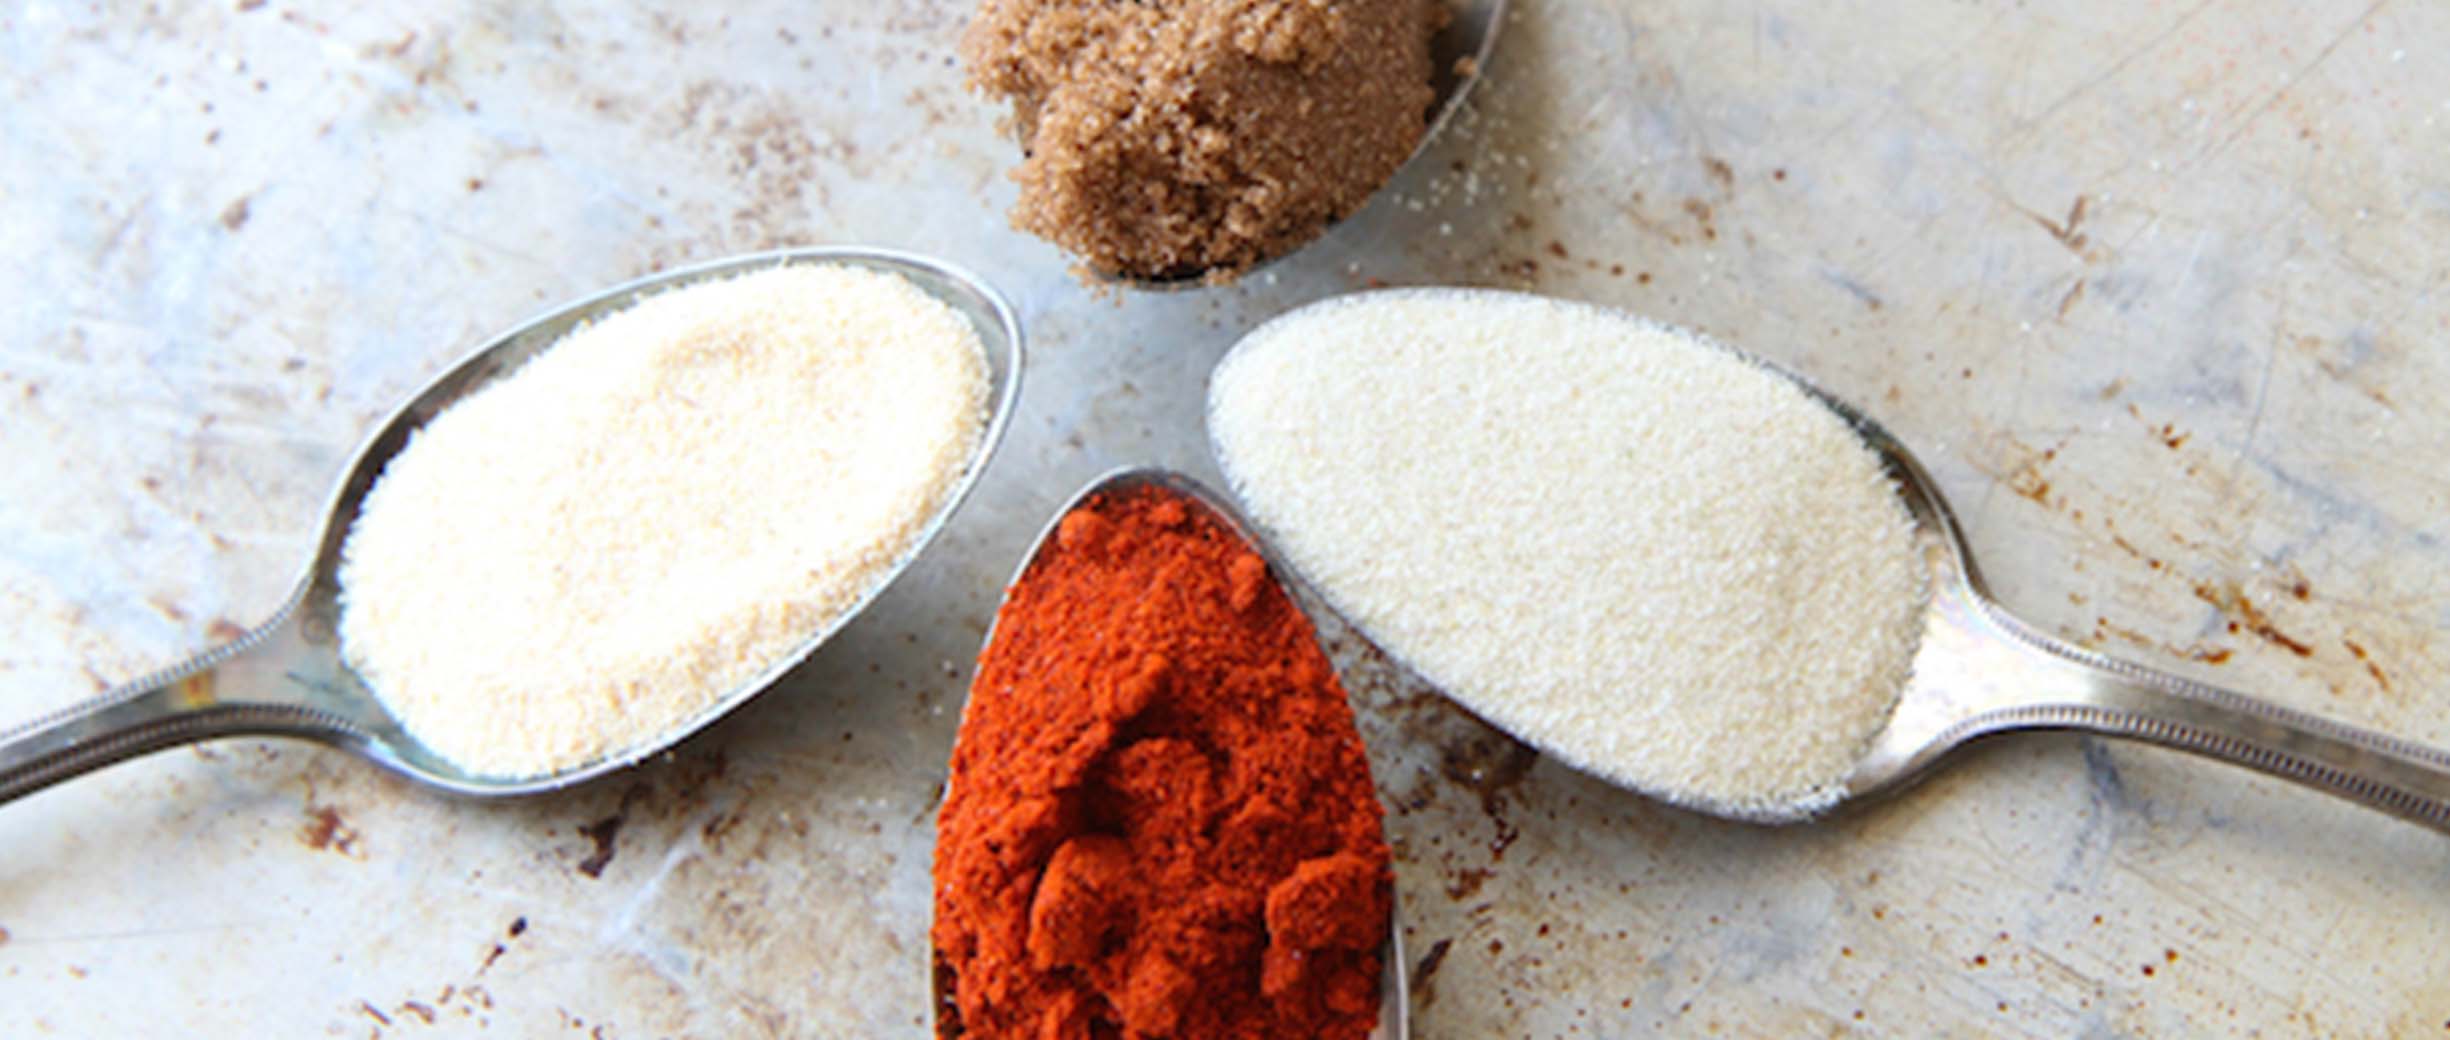 Make Your Own Homemade Seasonings With 7 Sure-Fire Recipes